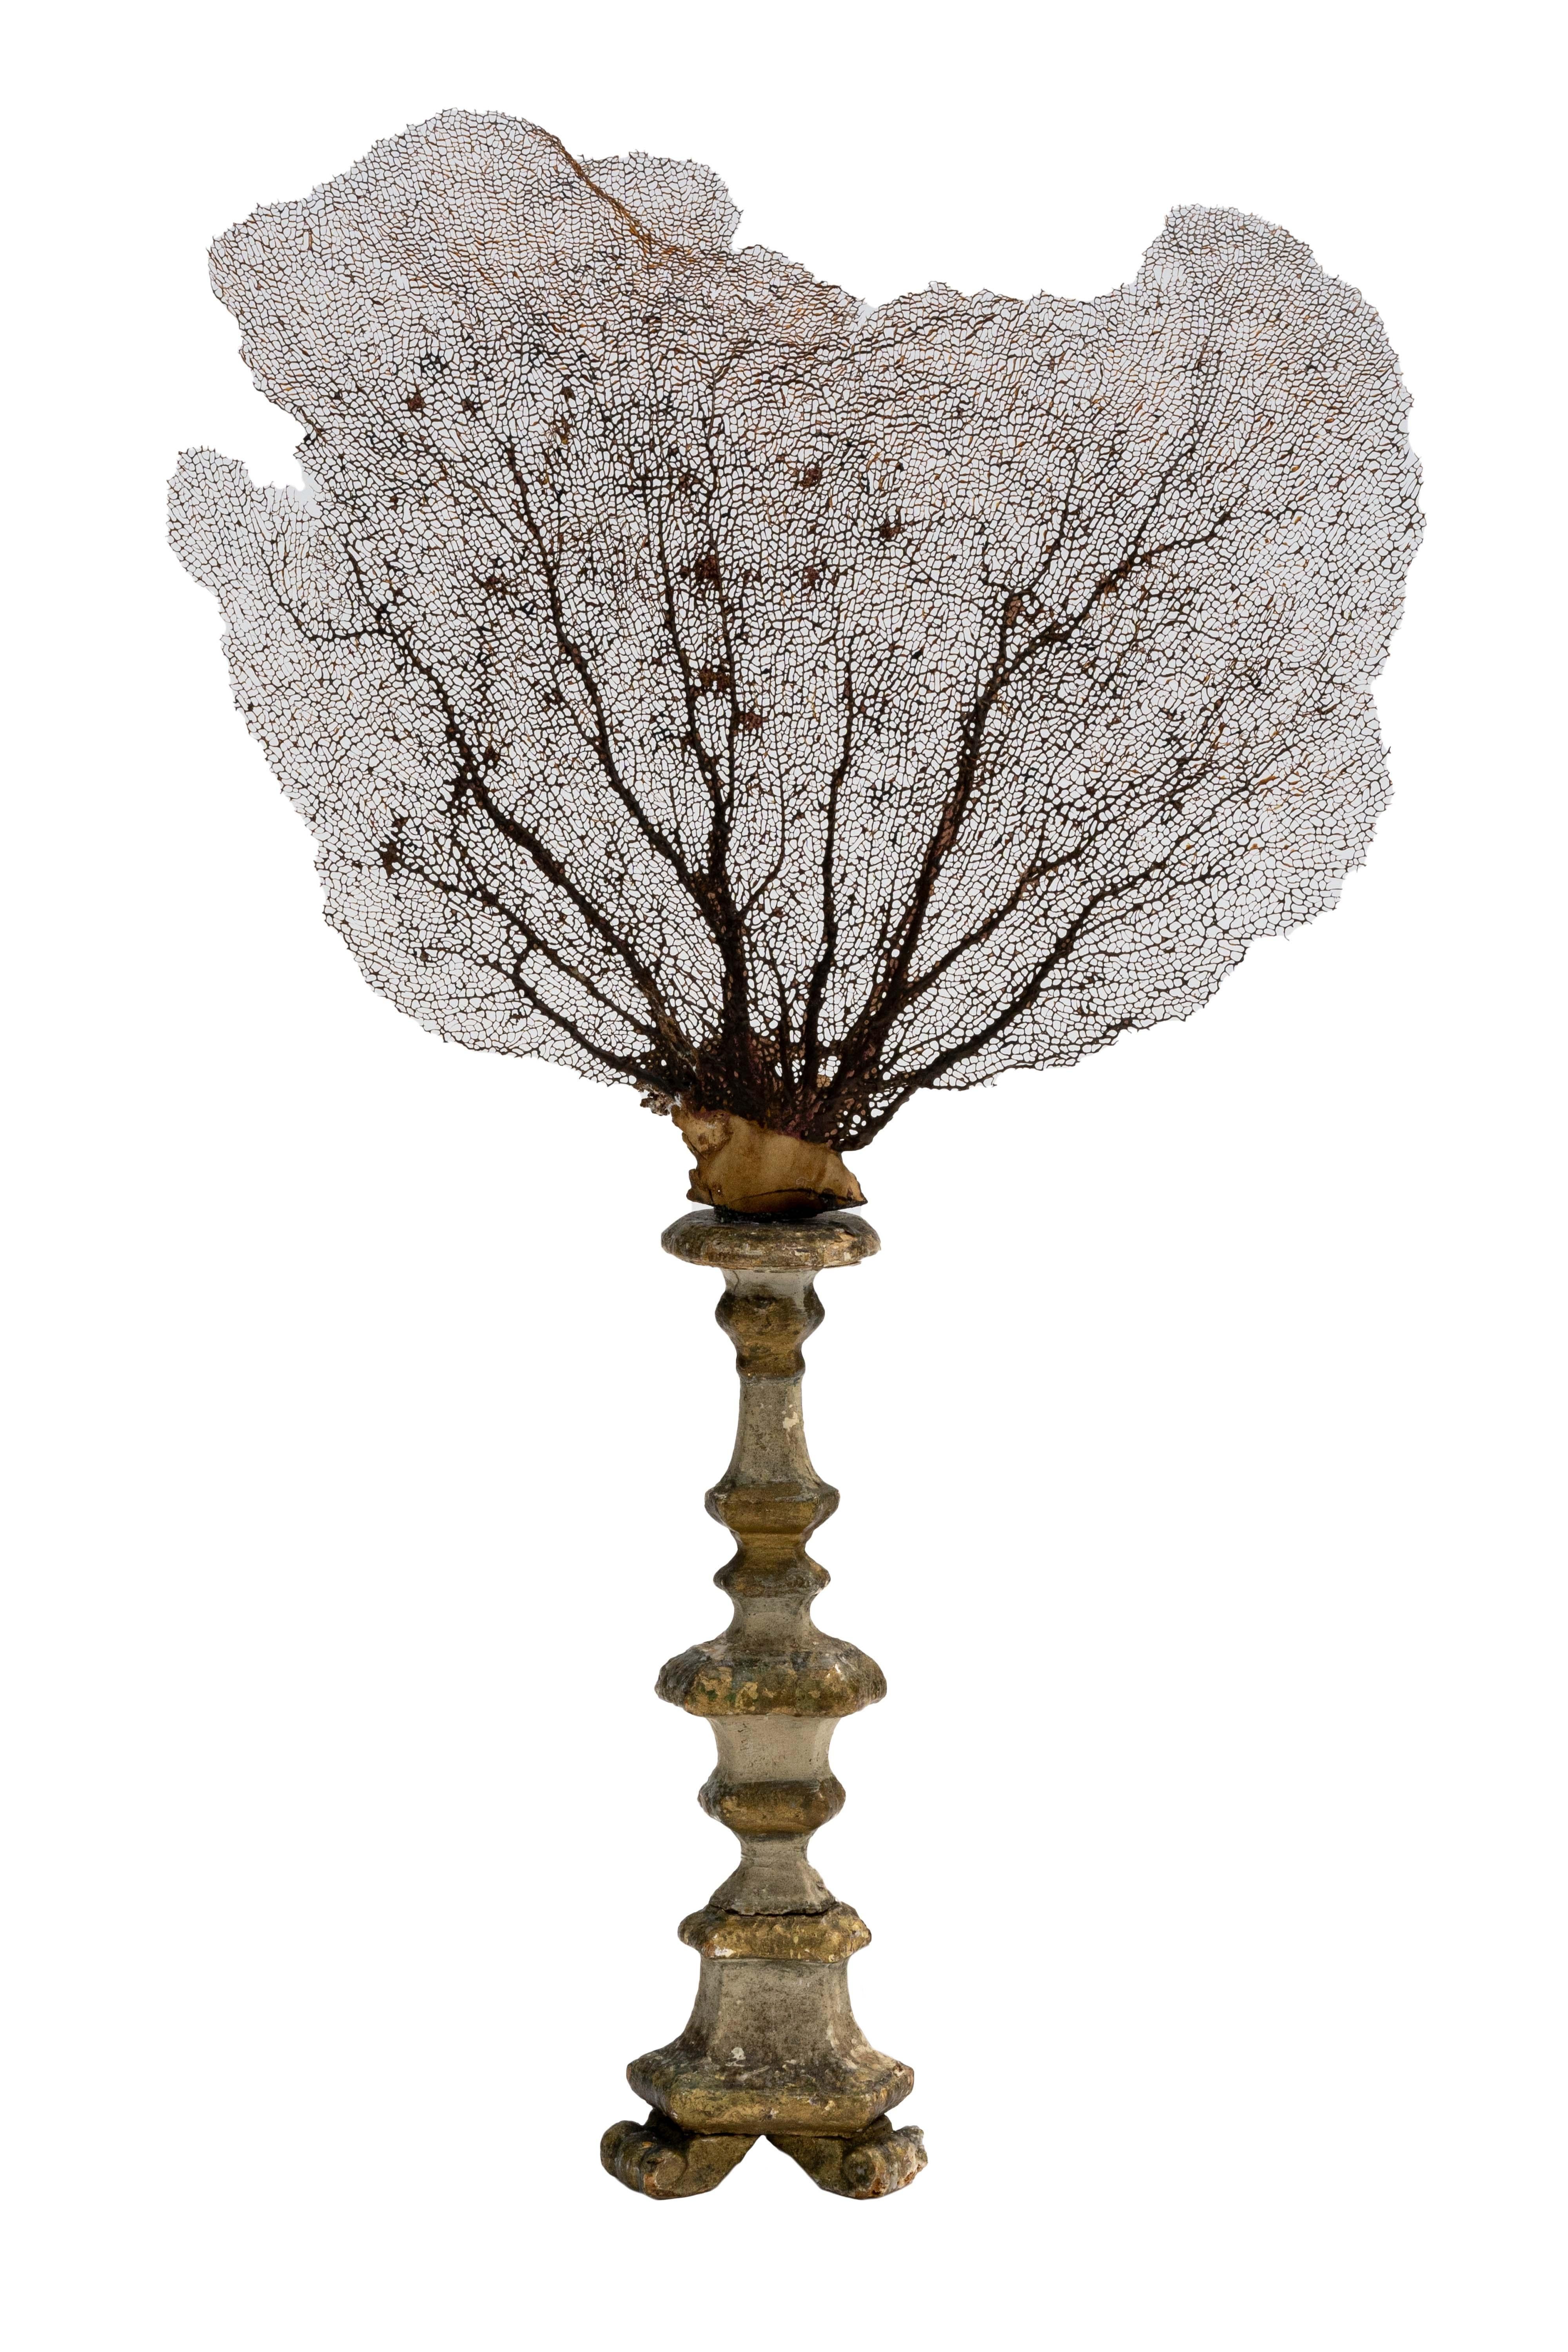 Mounted Brown Sea Fan on 18th Century Italian Ornate Gilded base

Measures Approximately: 20